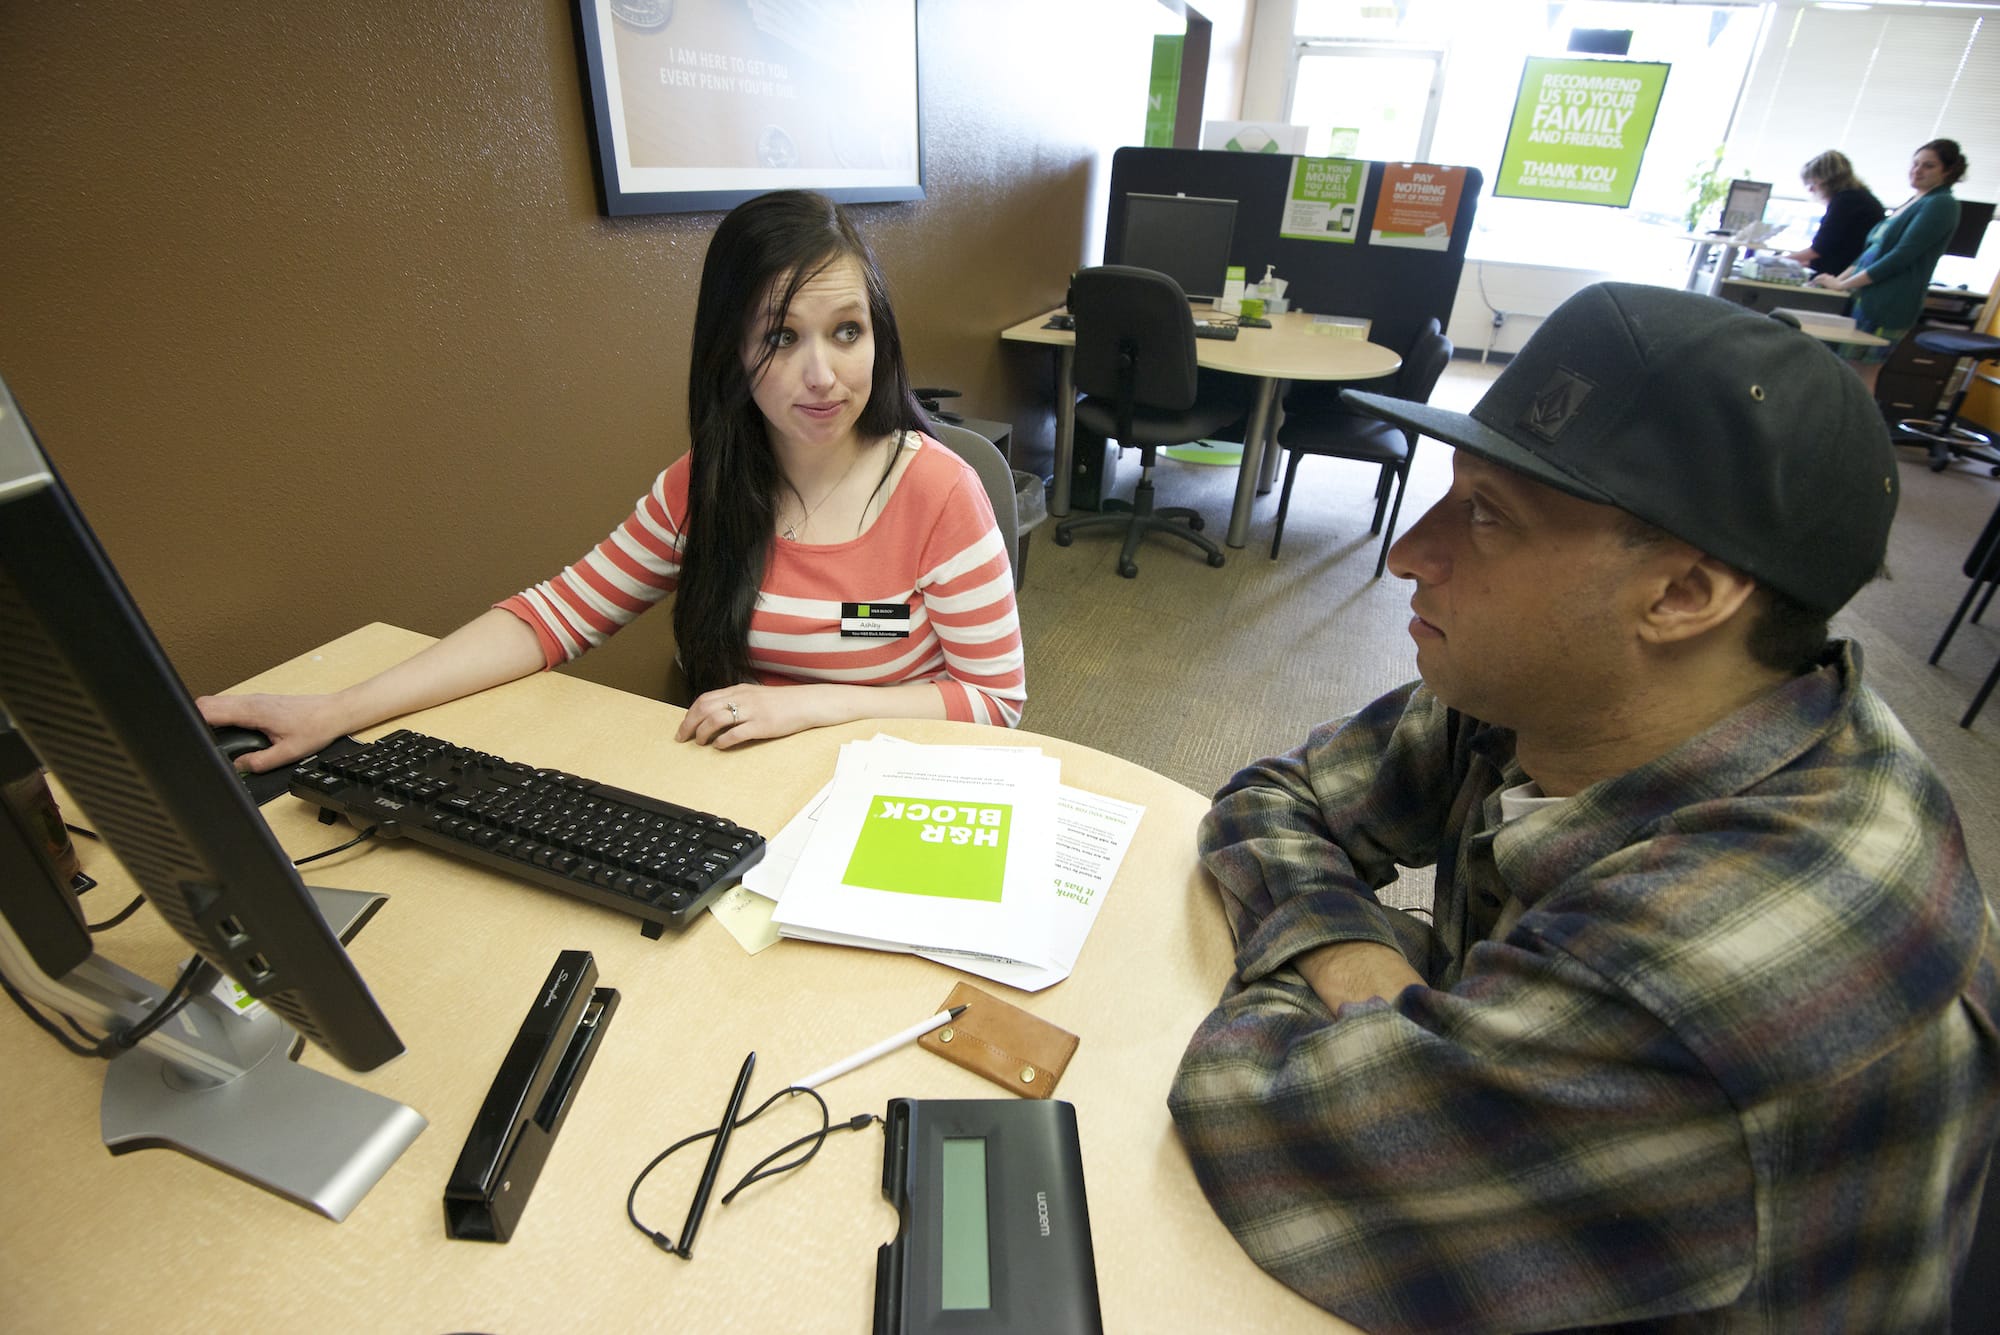 Ashley Bowers, left, a tax associate at H&amp;R Block, helps James Griffin of Vancouver with his tax returns Monday at the tax firm's Main Street office. Griffin, a salesperson, and said his biggest worry every tax season is whether he owes money or not.